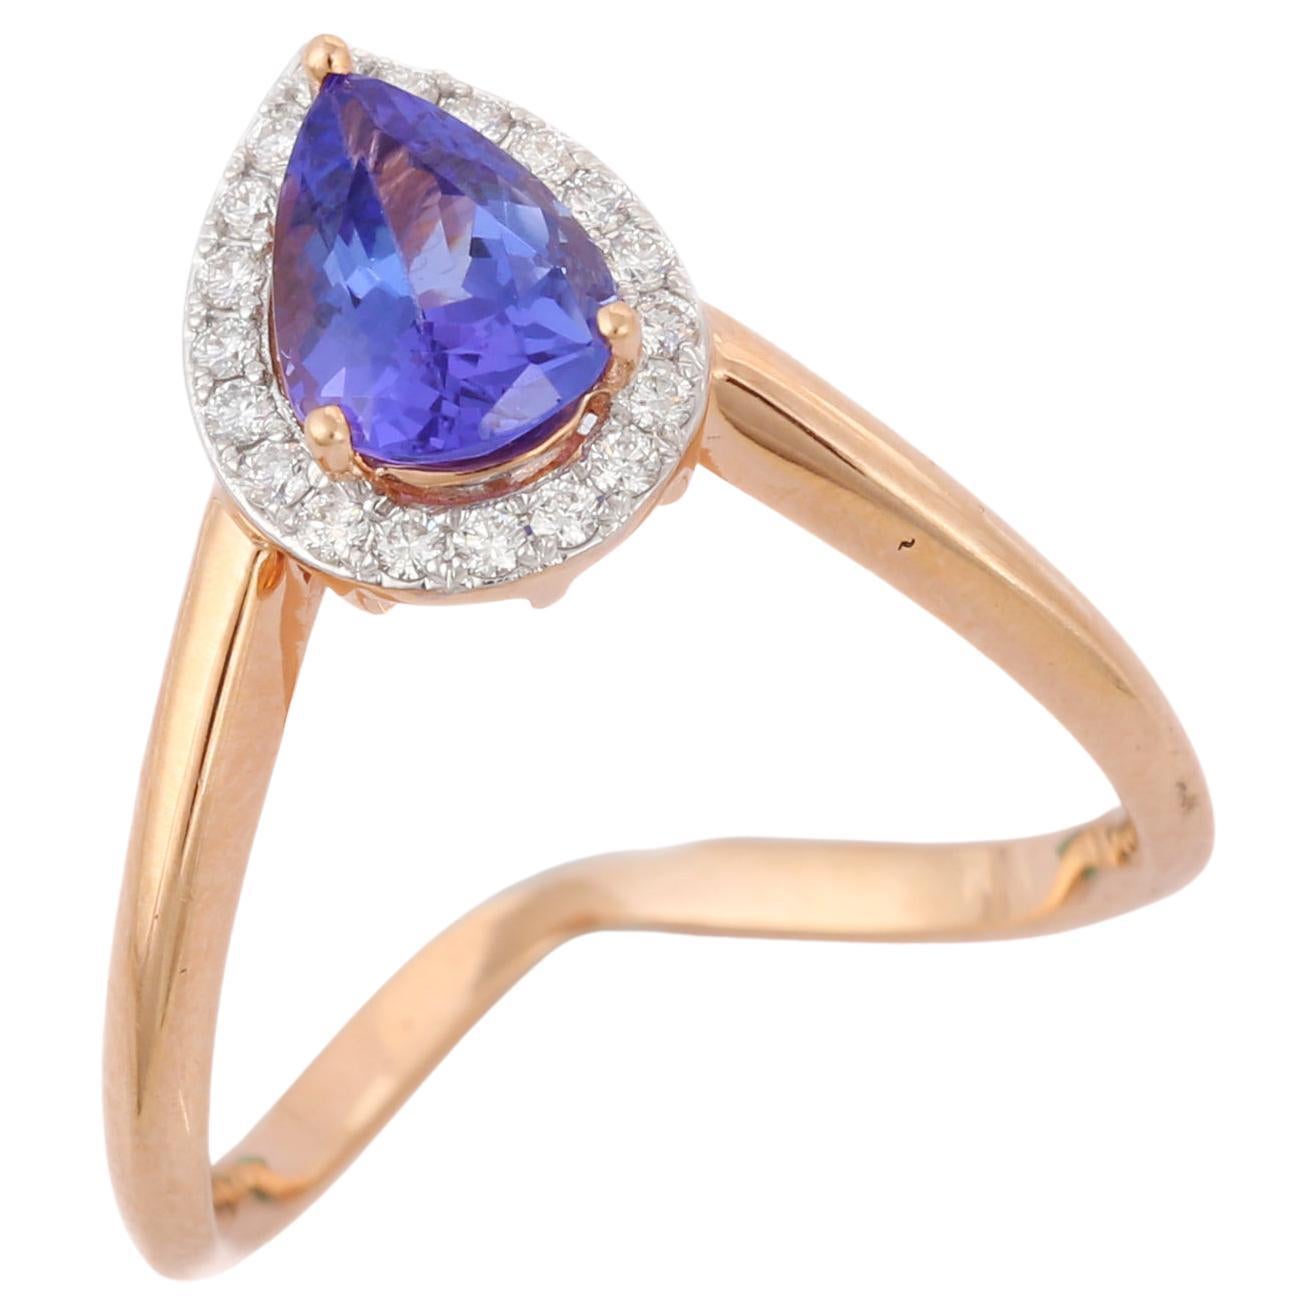 For Sale:  18K Rose Gold Pear Shape Tanzanite and Diamond Ring  2